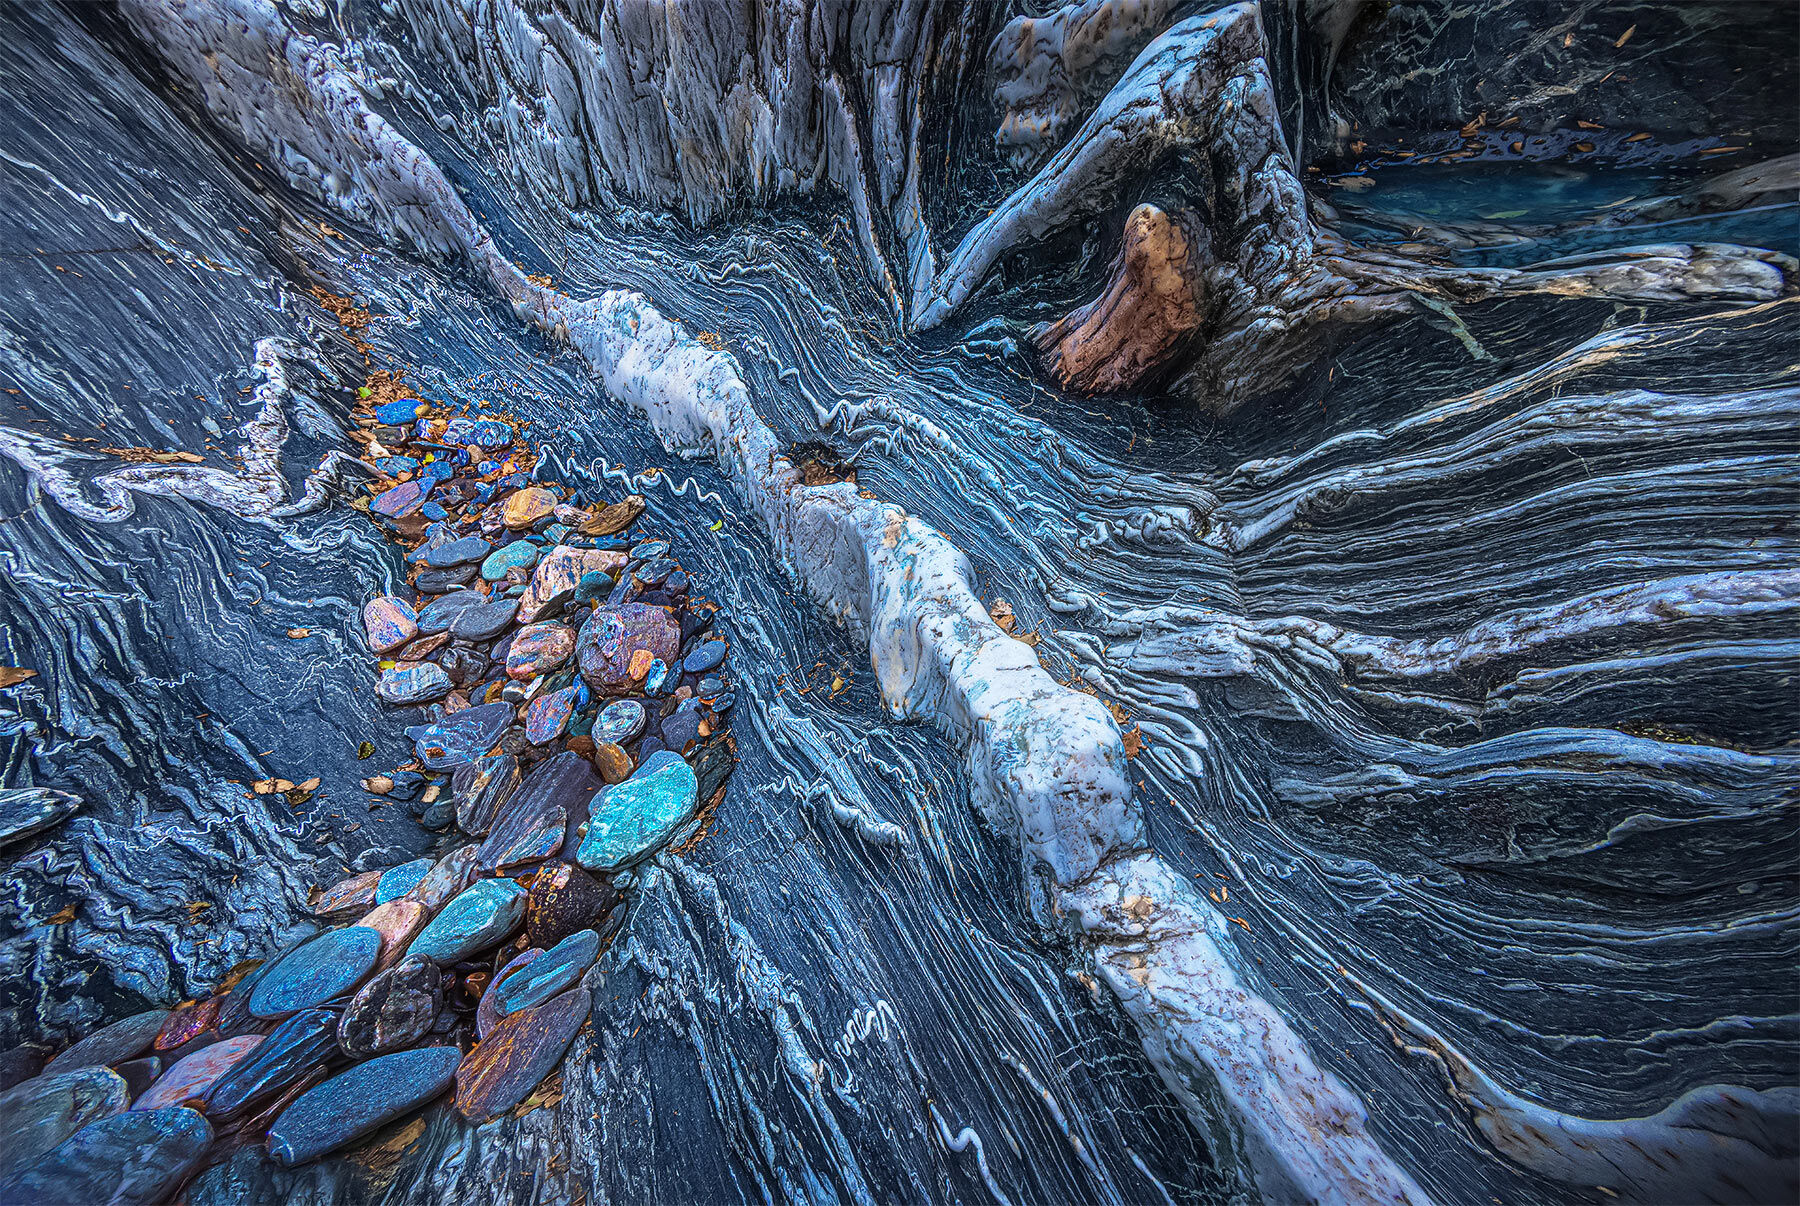 Amazing polished Shist rock and various pebbles along the river canyon in New Zealand.